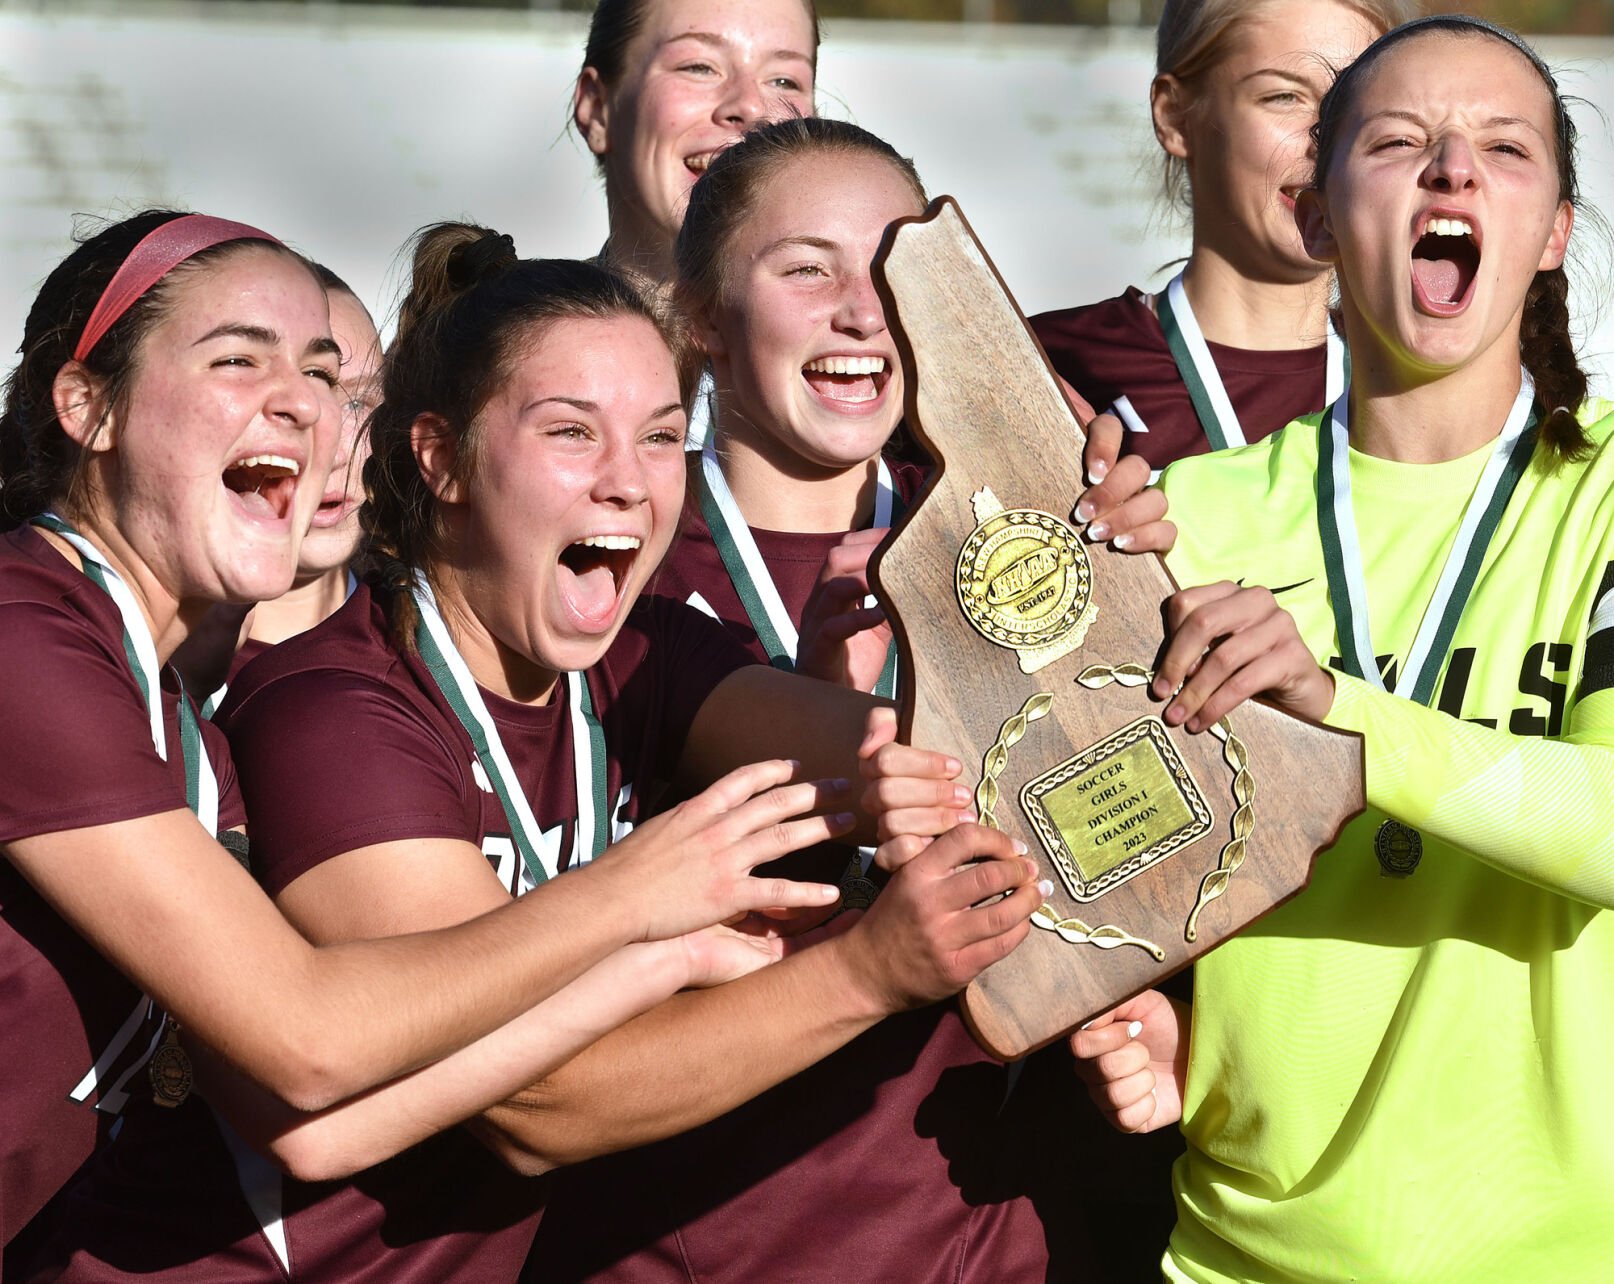 Timberlane Regional girls secure their first-ever soccer state championship with a stunning goal